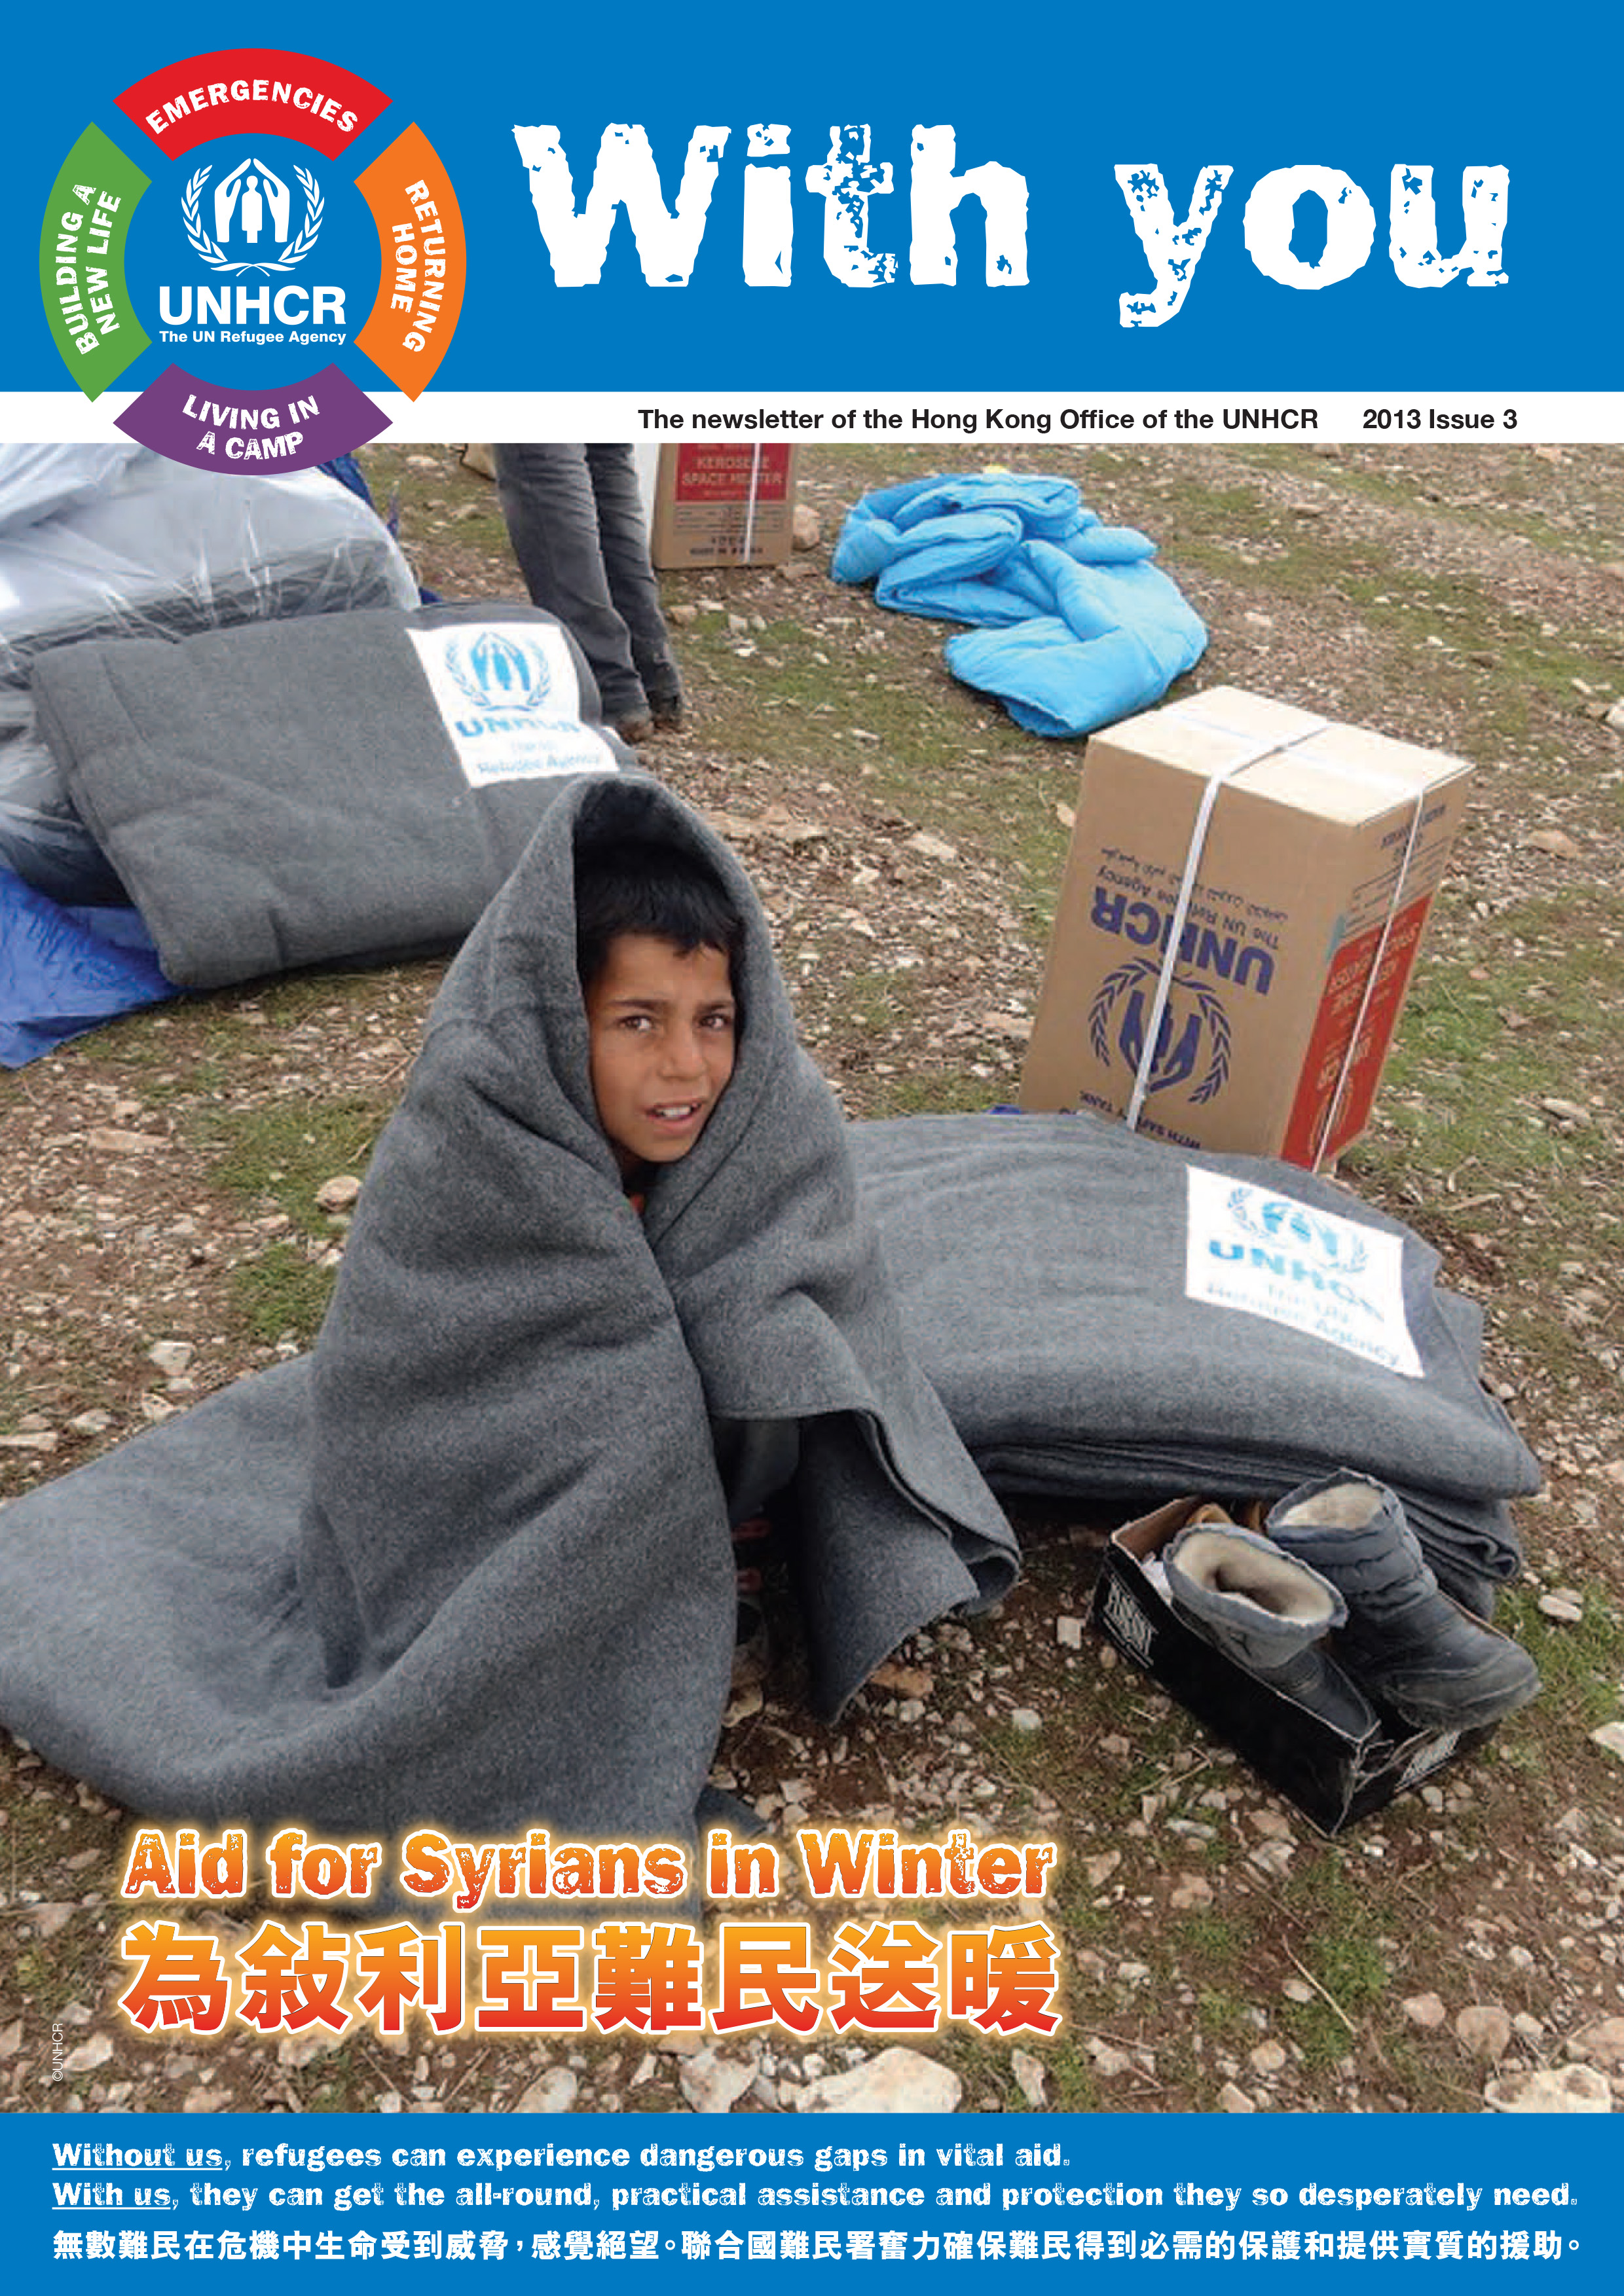 Aid for Syrians in Winter